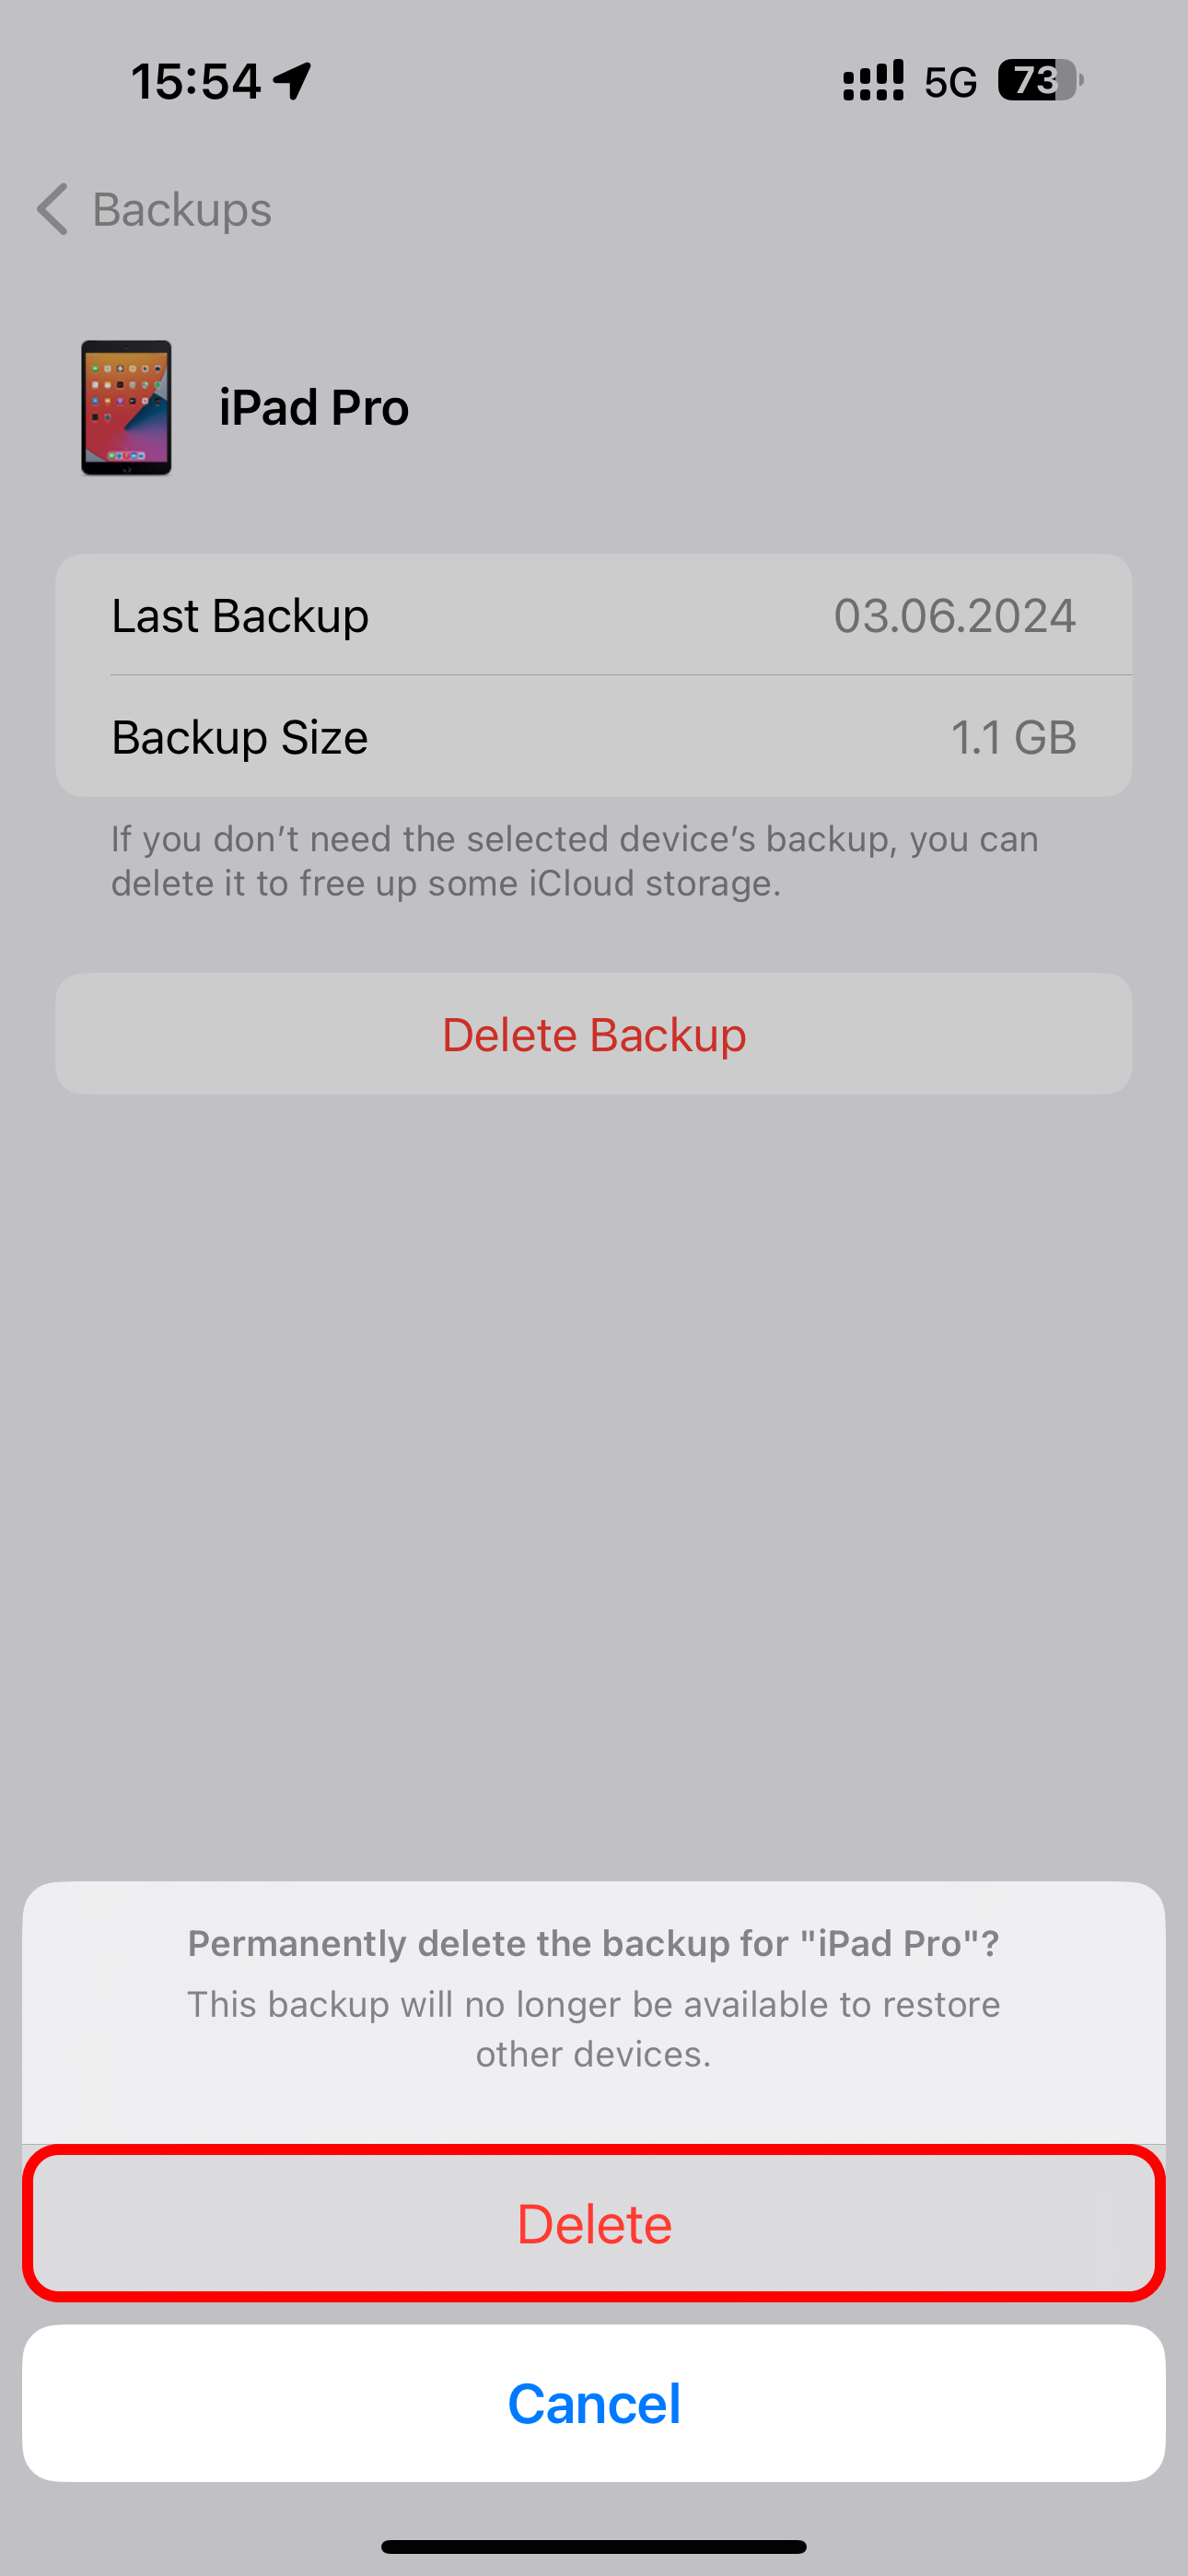 Confirming deleting iCloud backup for iPad Pro in the iPhone's Settings app.